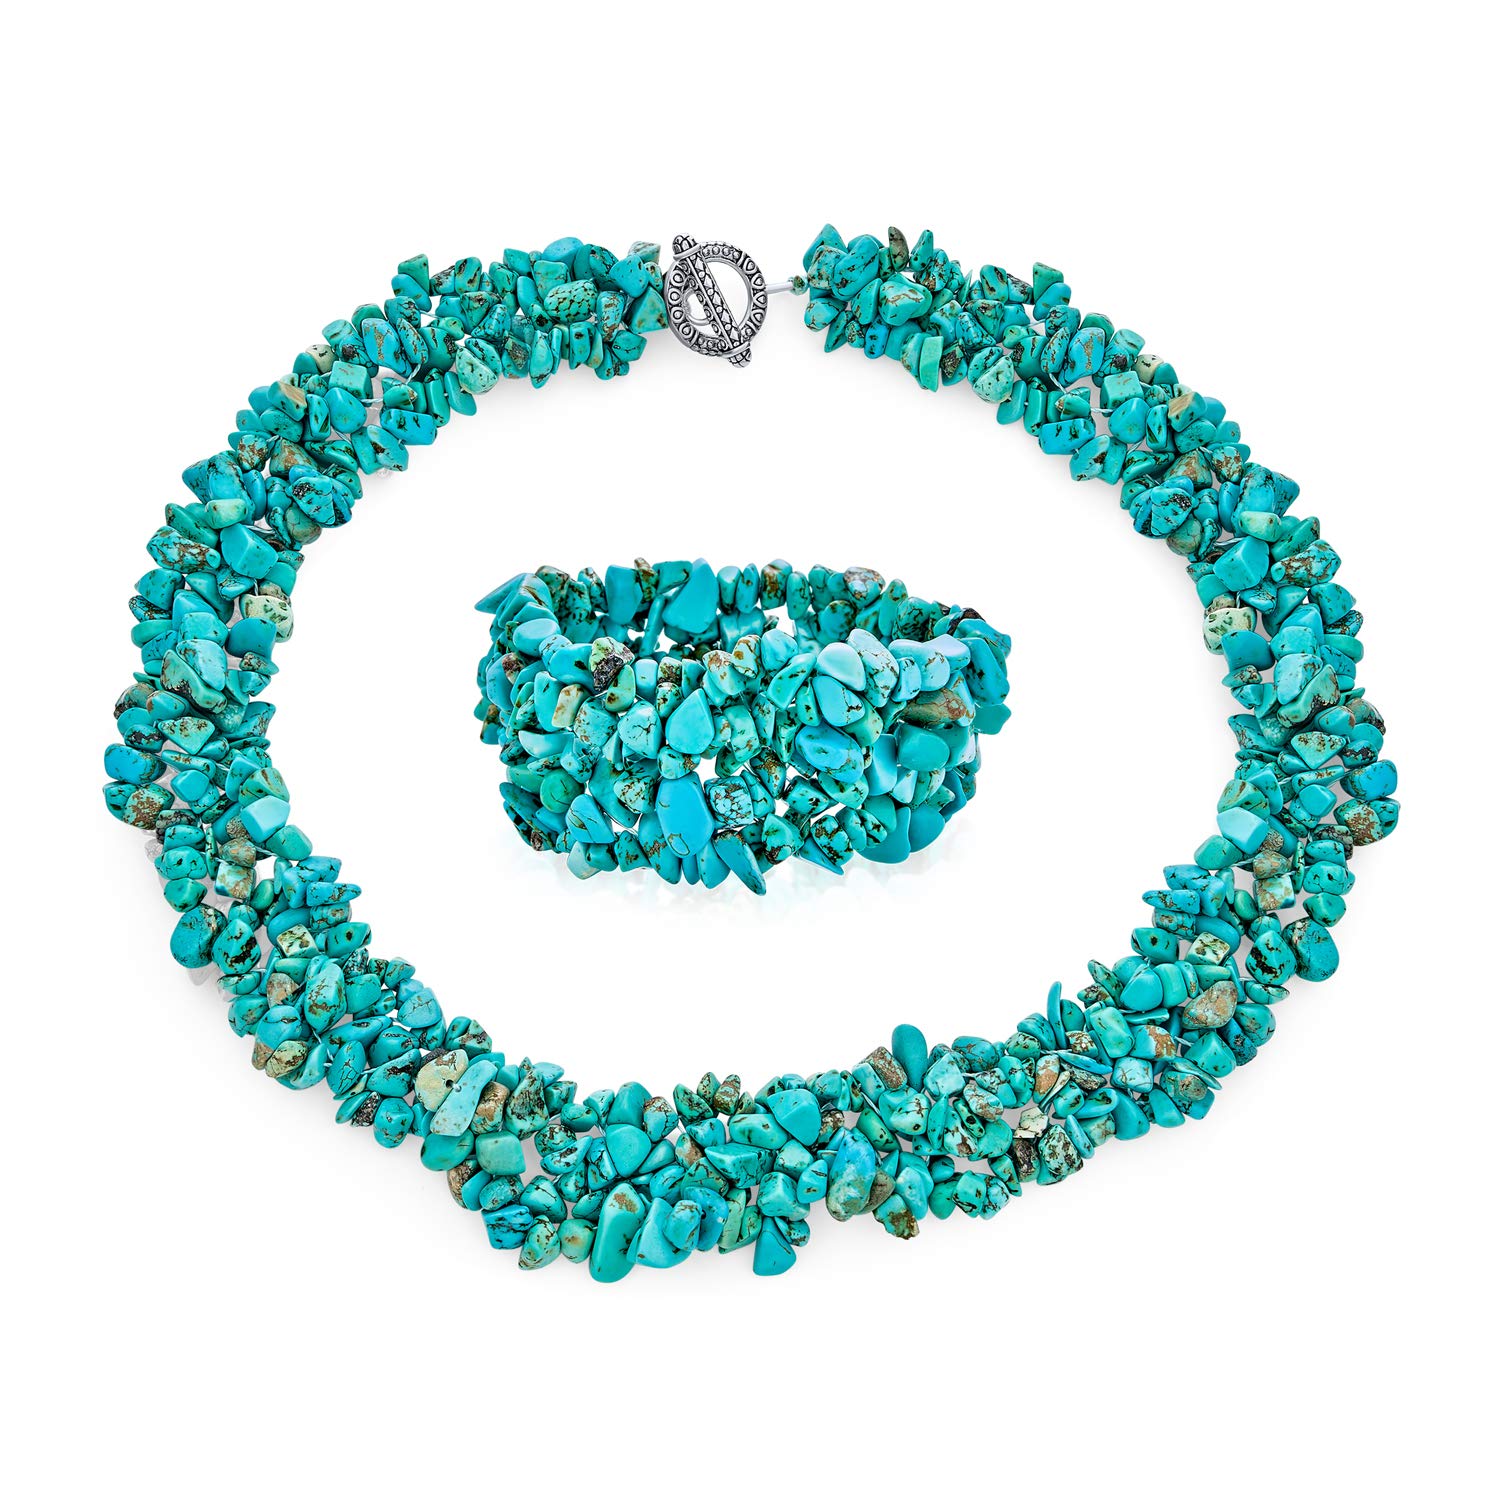 Large Wide Color Gemstone Chips Cluster Multi Strand Statement Bib Collar Necklace Stretch Bracelet Bangle Cuff Jewelry Set For Women